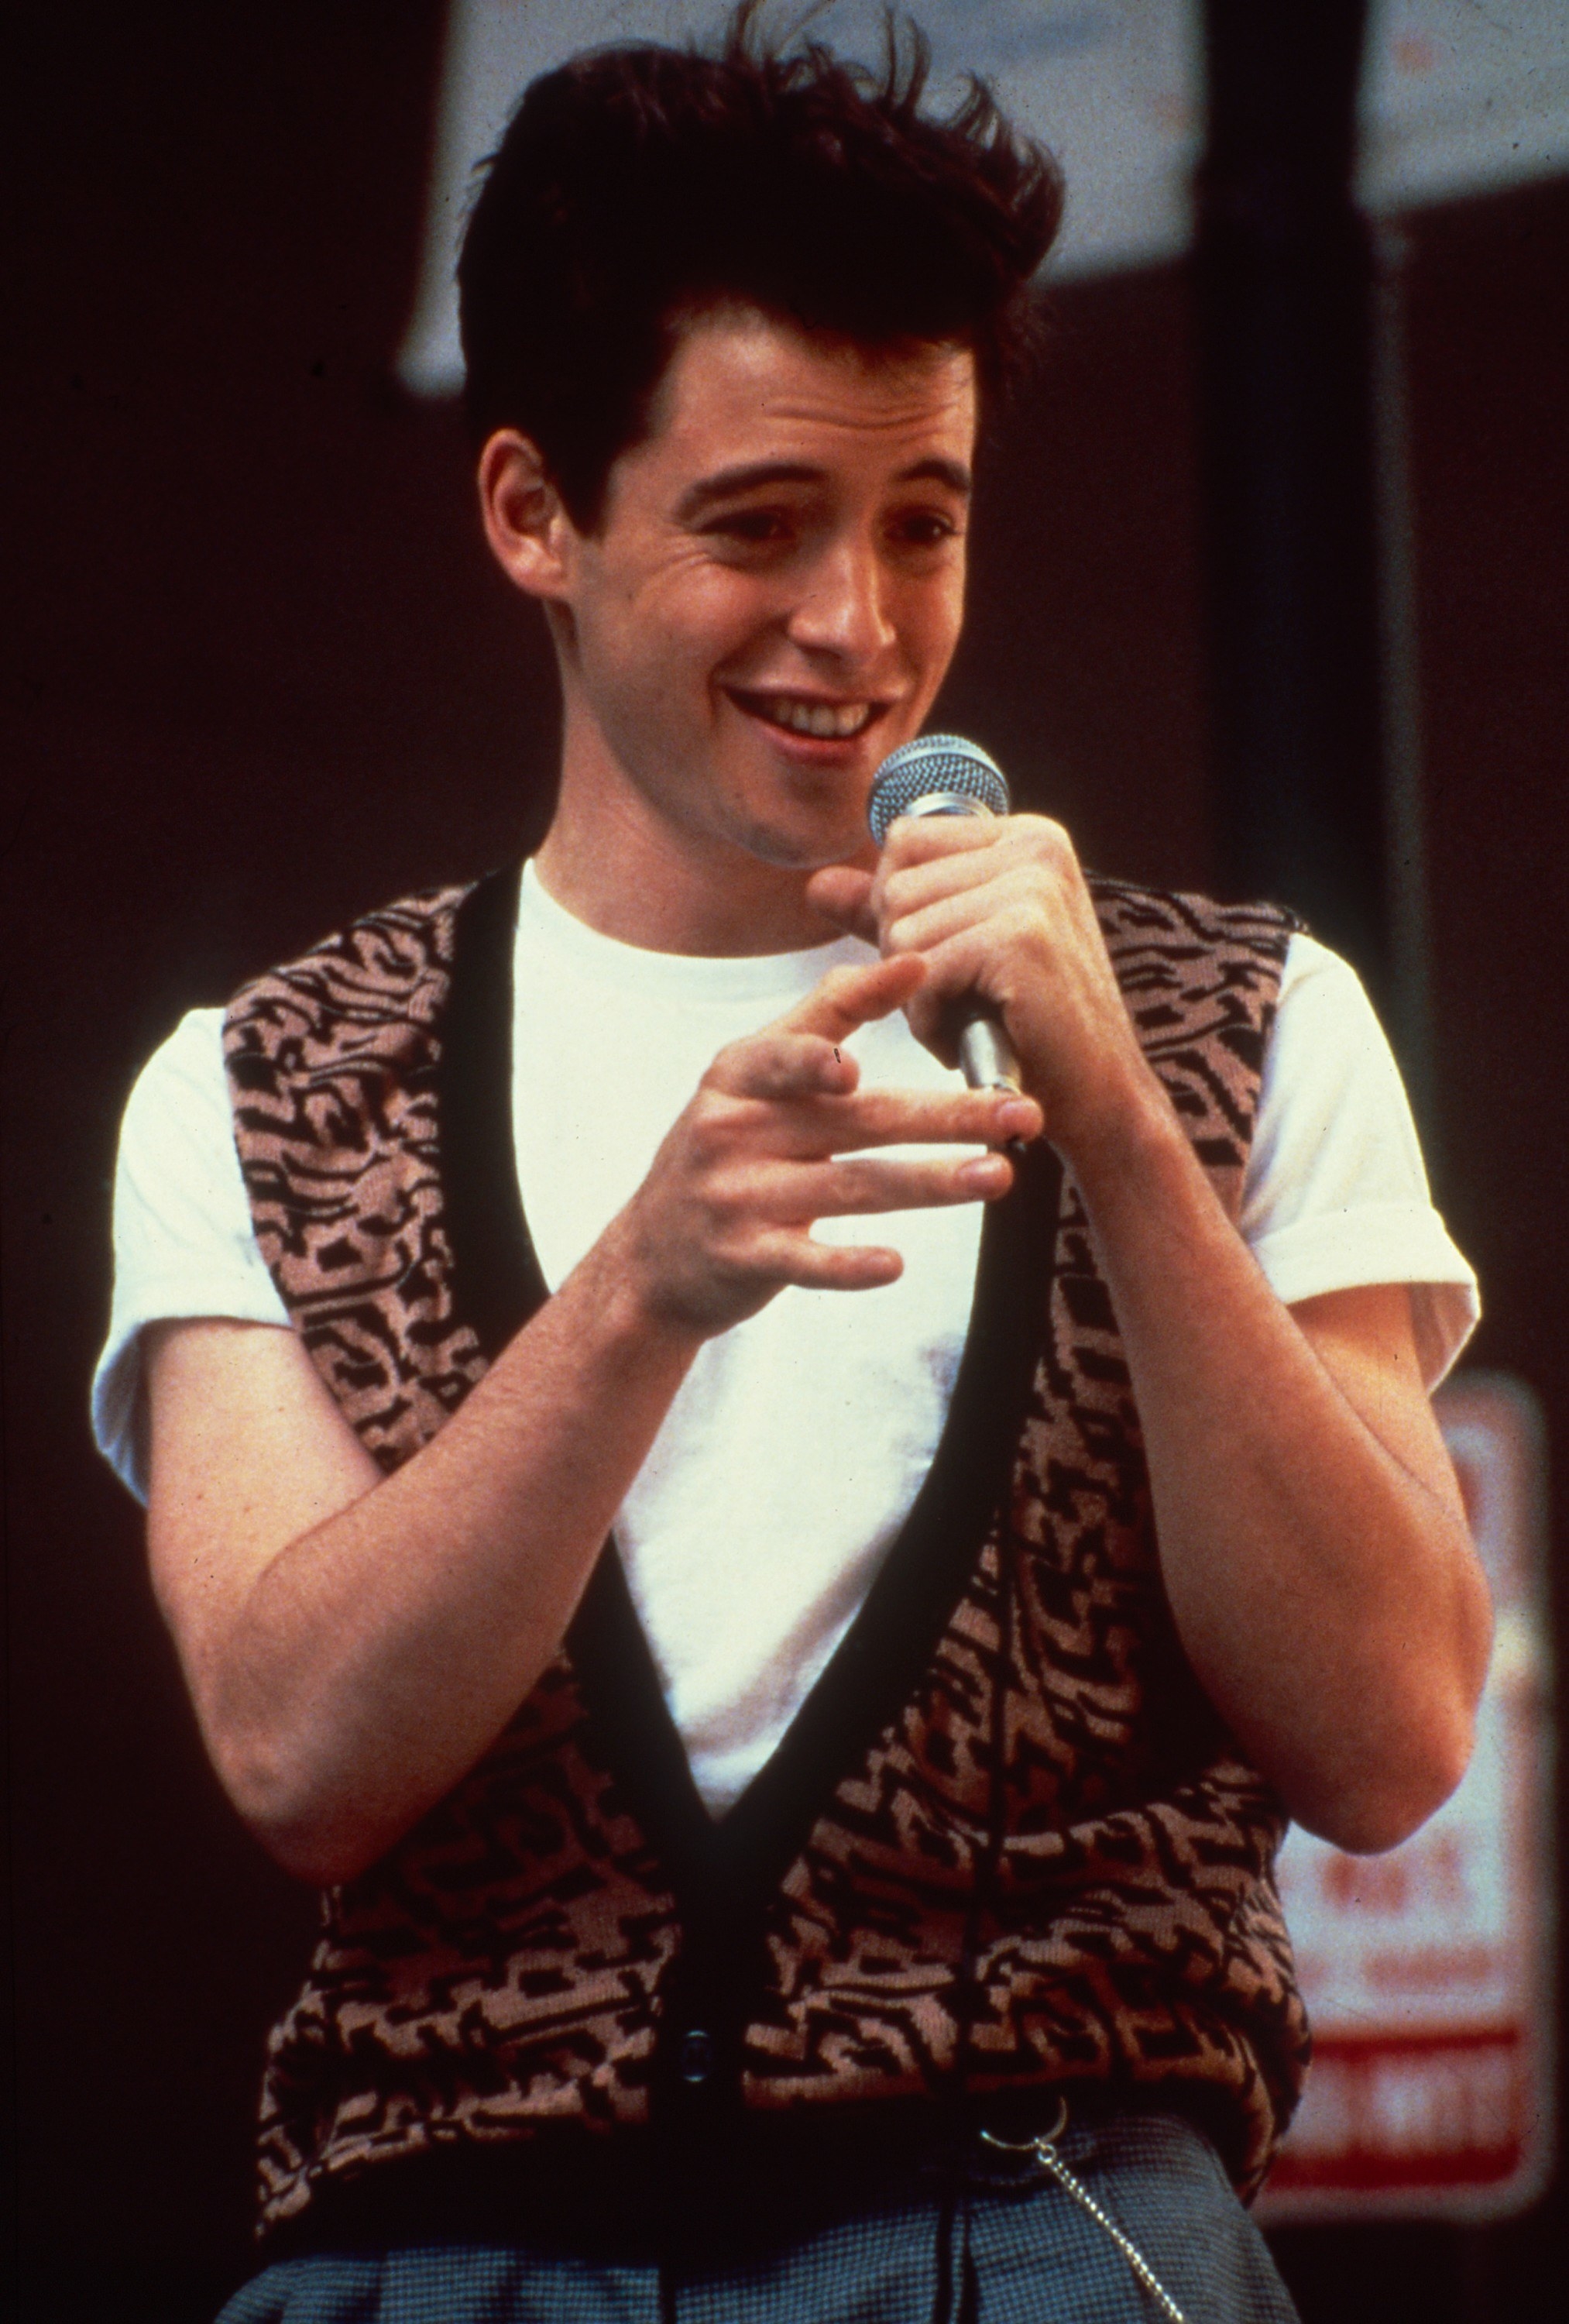 Ferris Bueller at the microphone